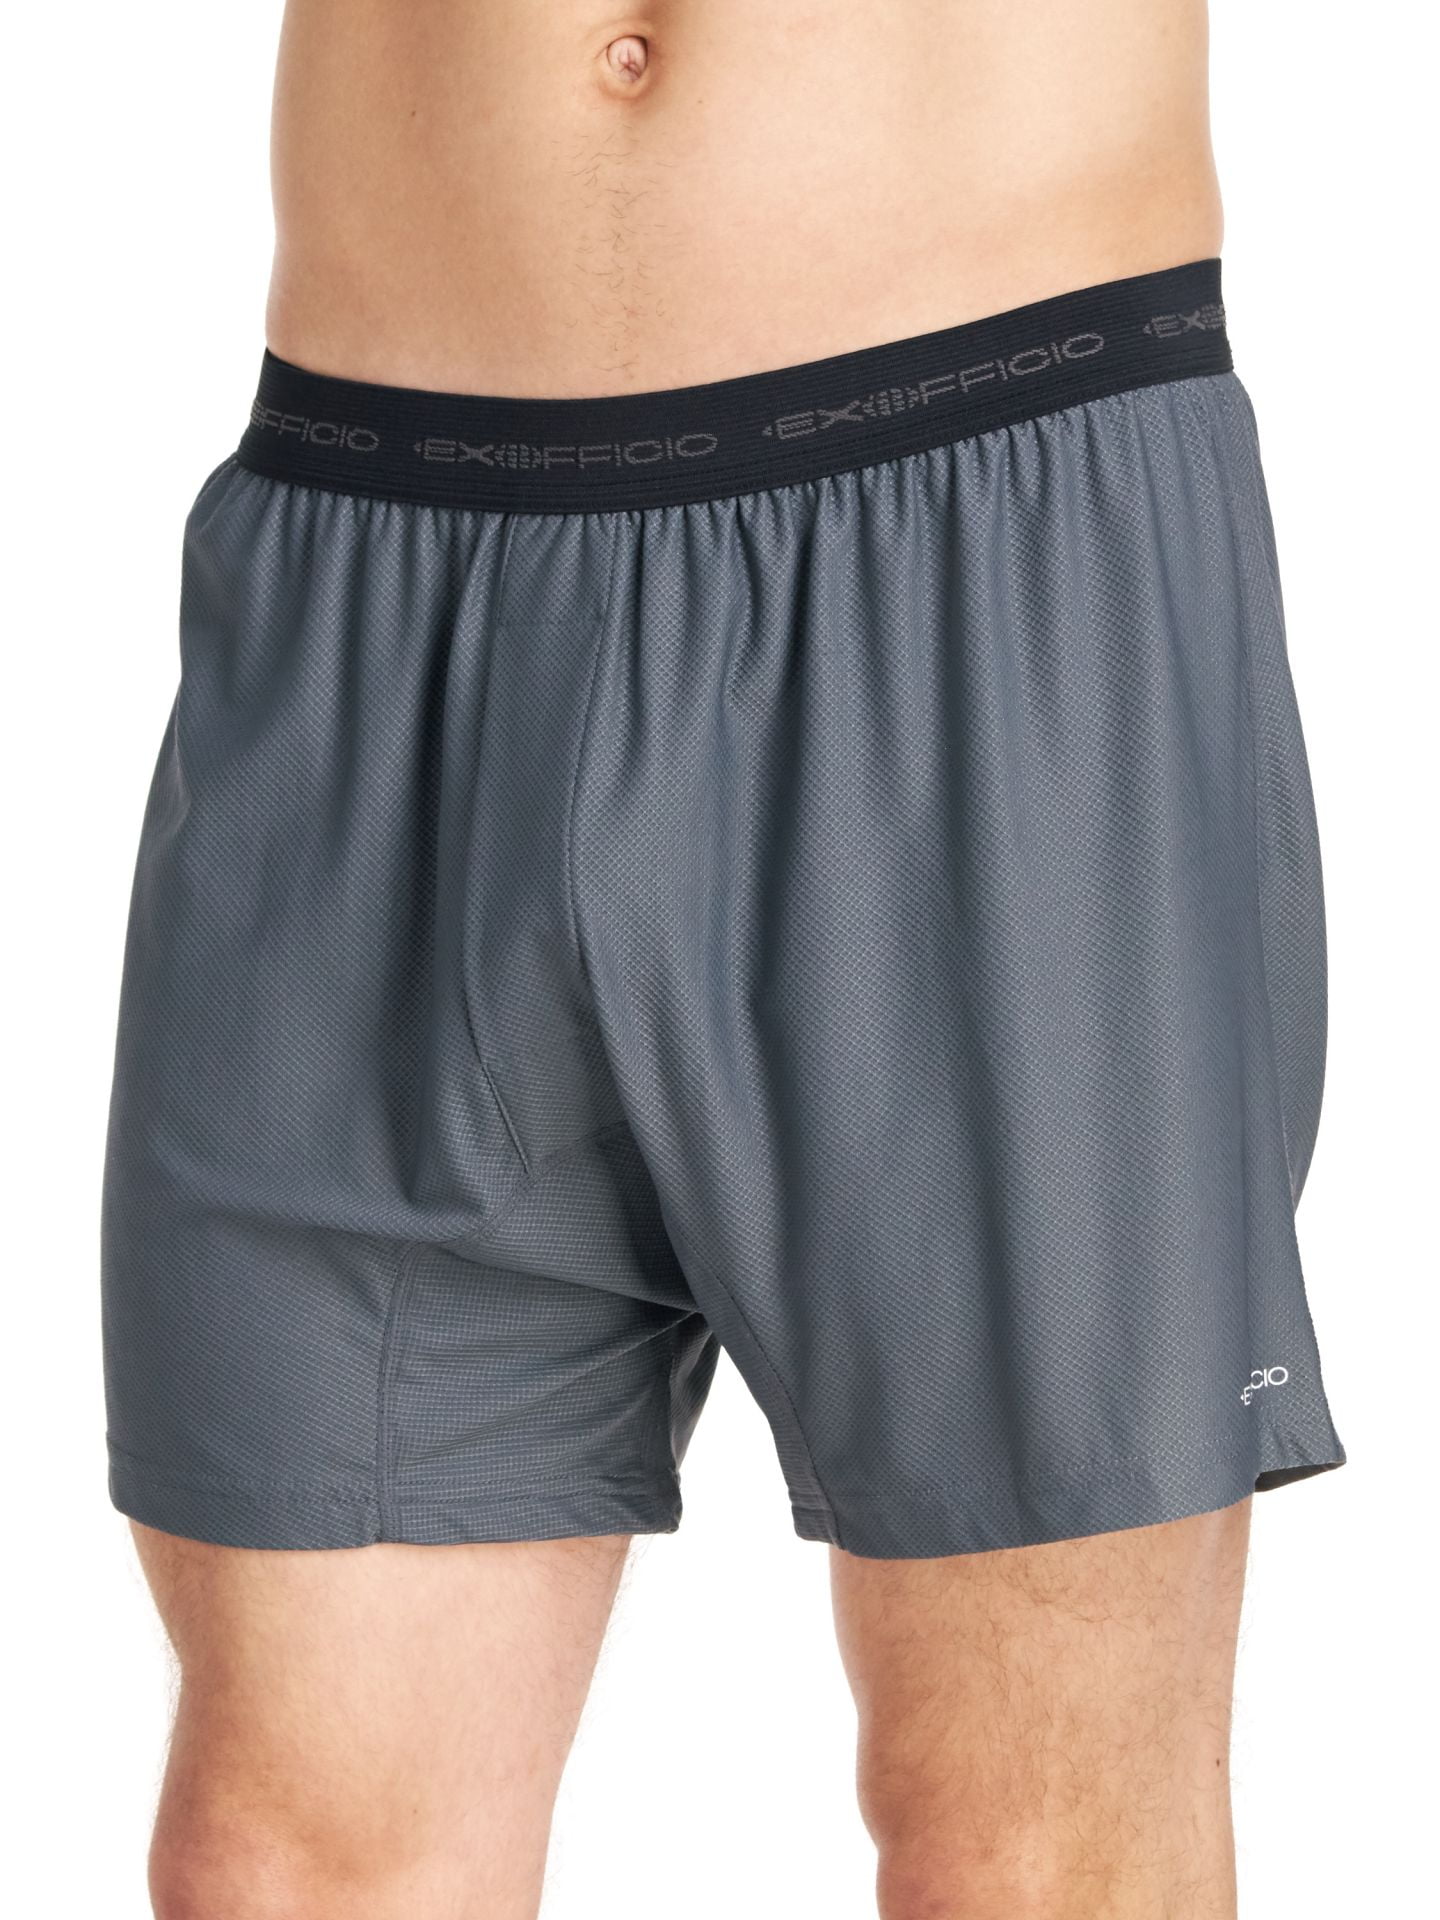 ExOfficio Mens Give-N-Go Boxer Brief,Charcoal,Large 